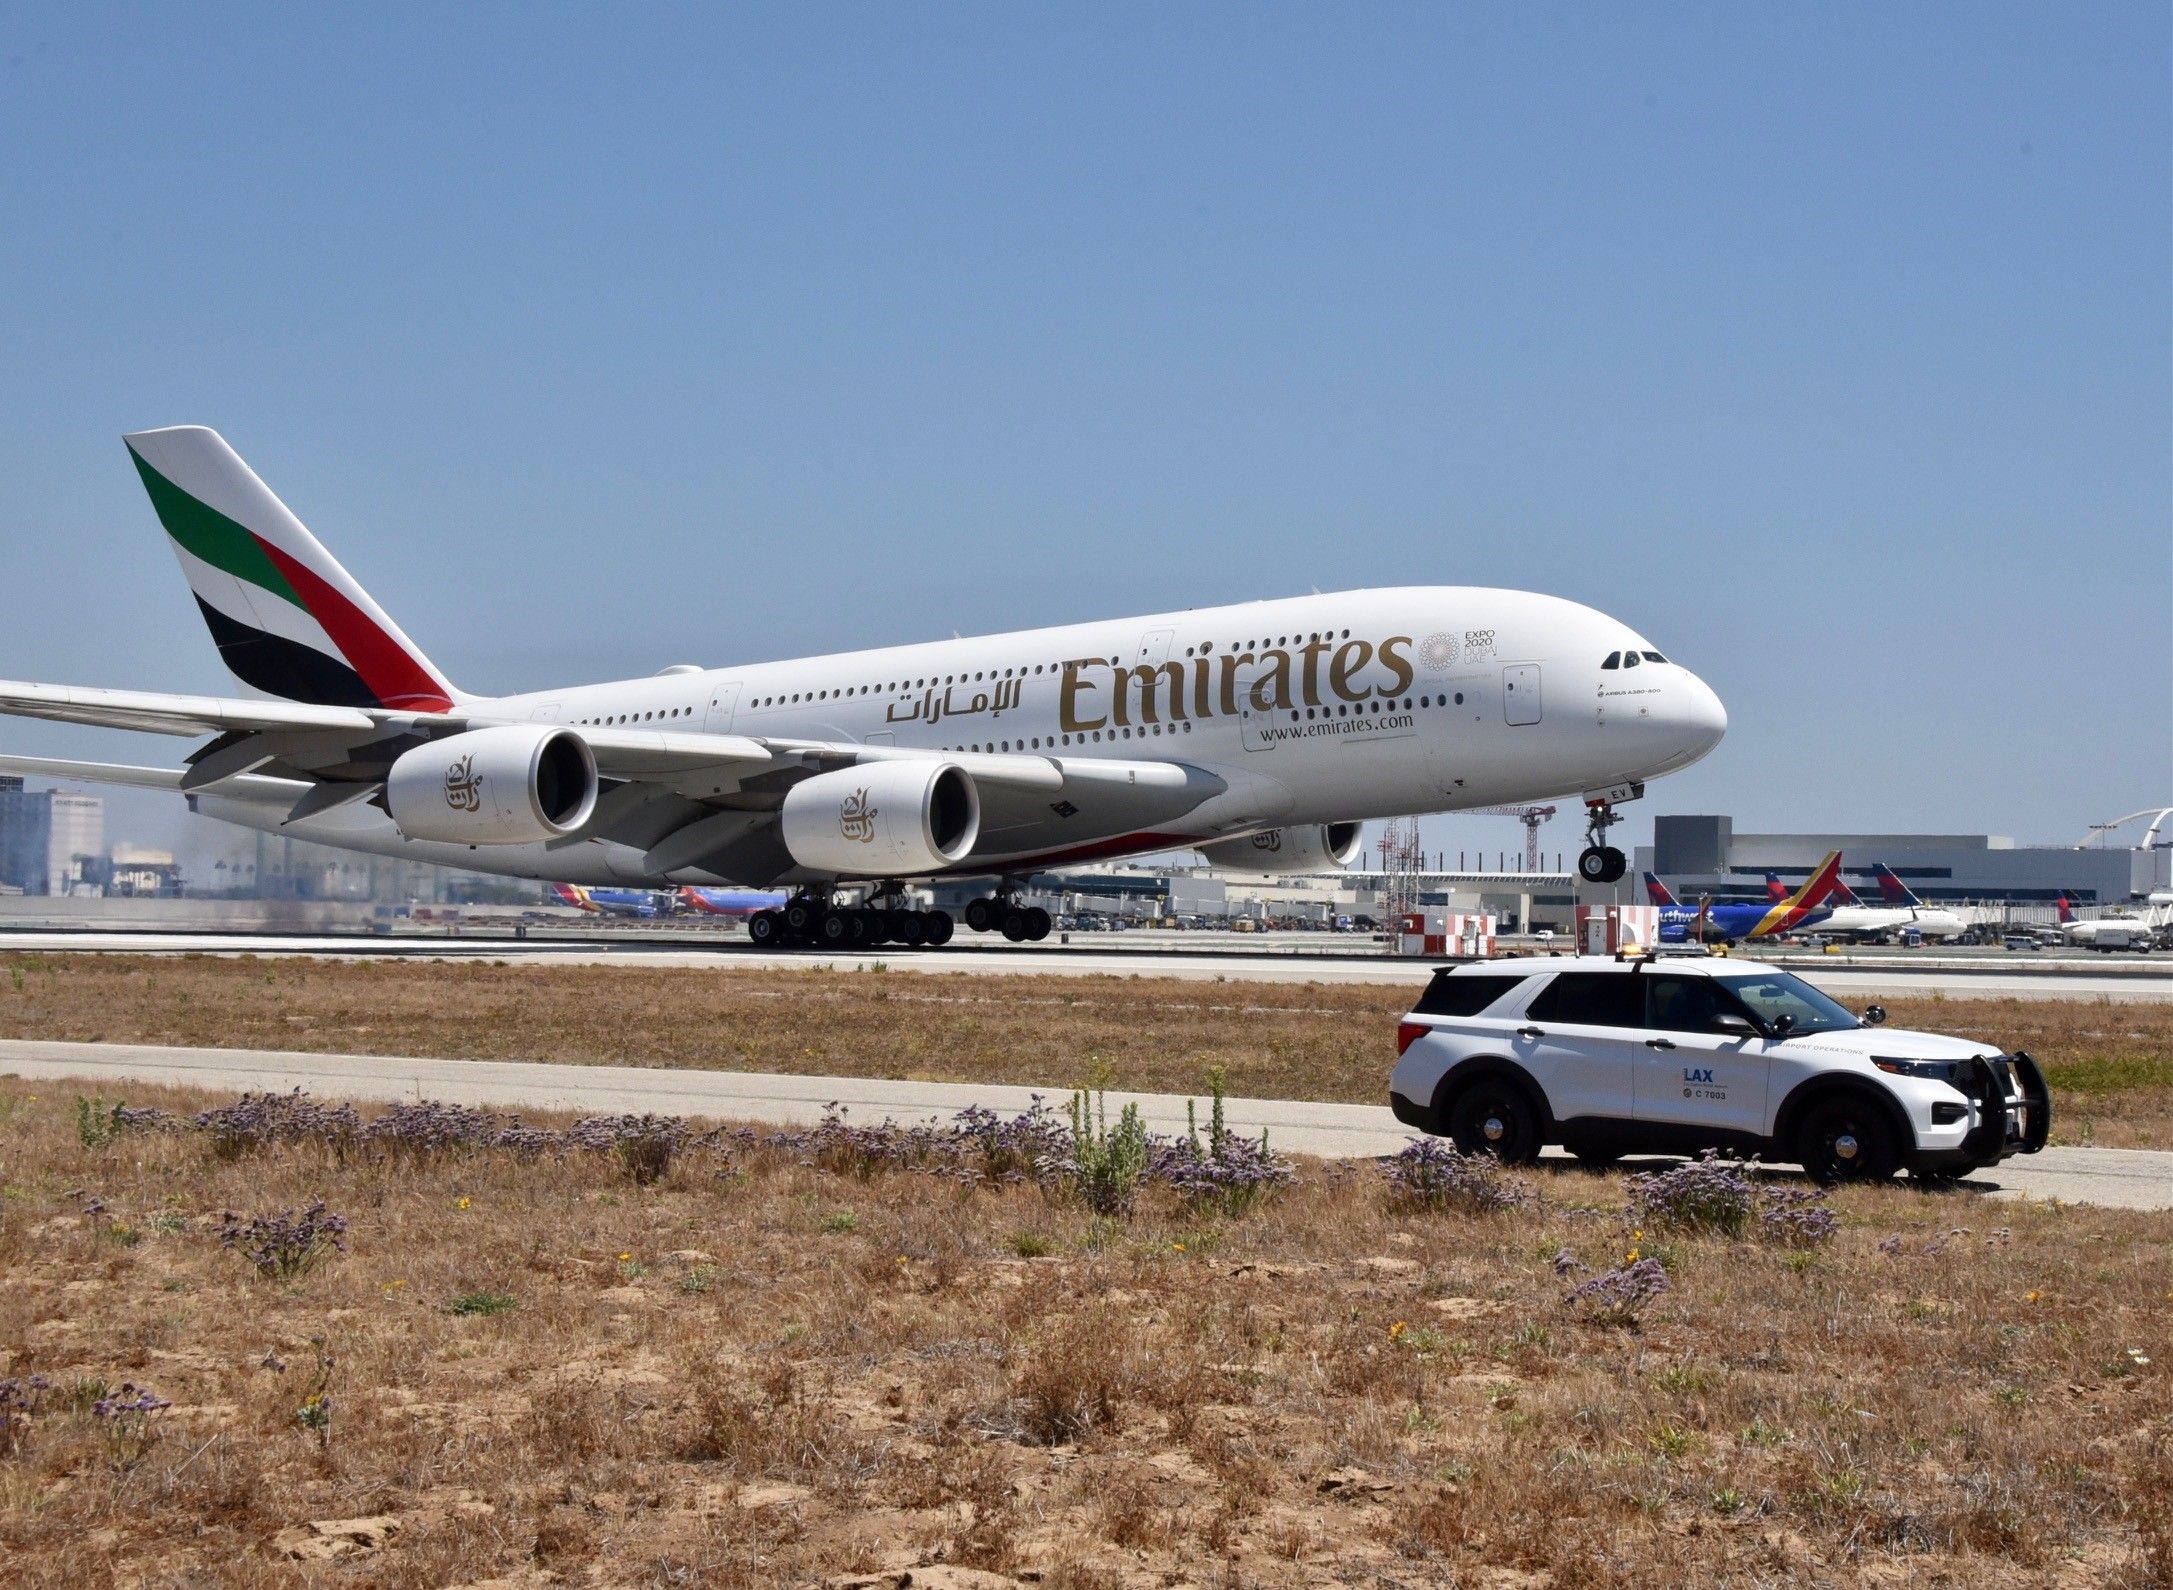 Emitrates Airbus A380 taking off